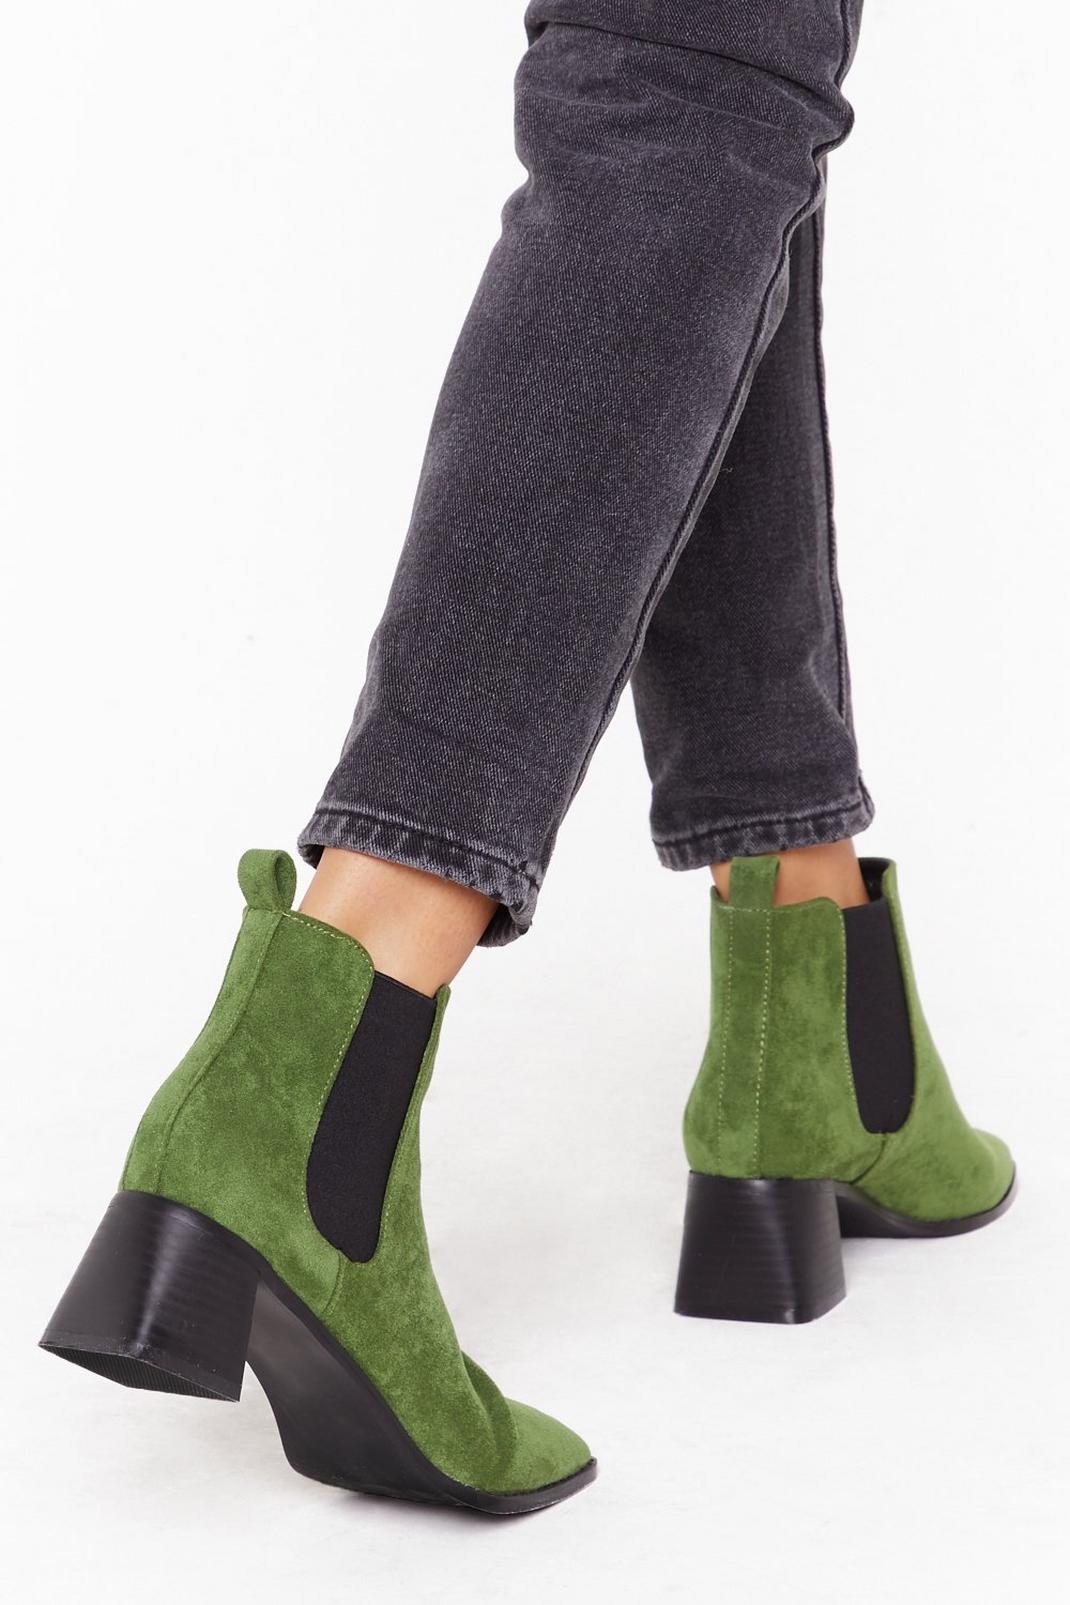 Suede Your Move Faux Suede Chelsea Boots image number 1